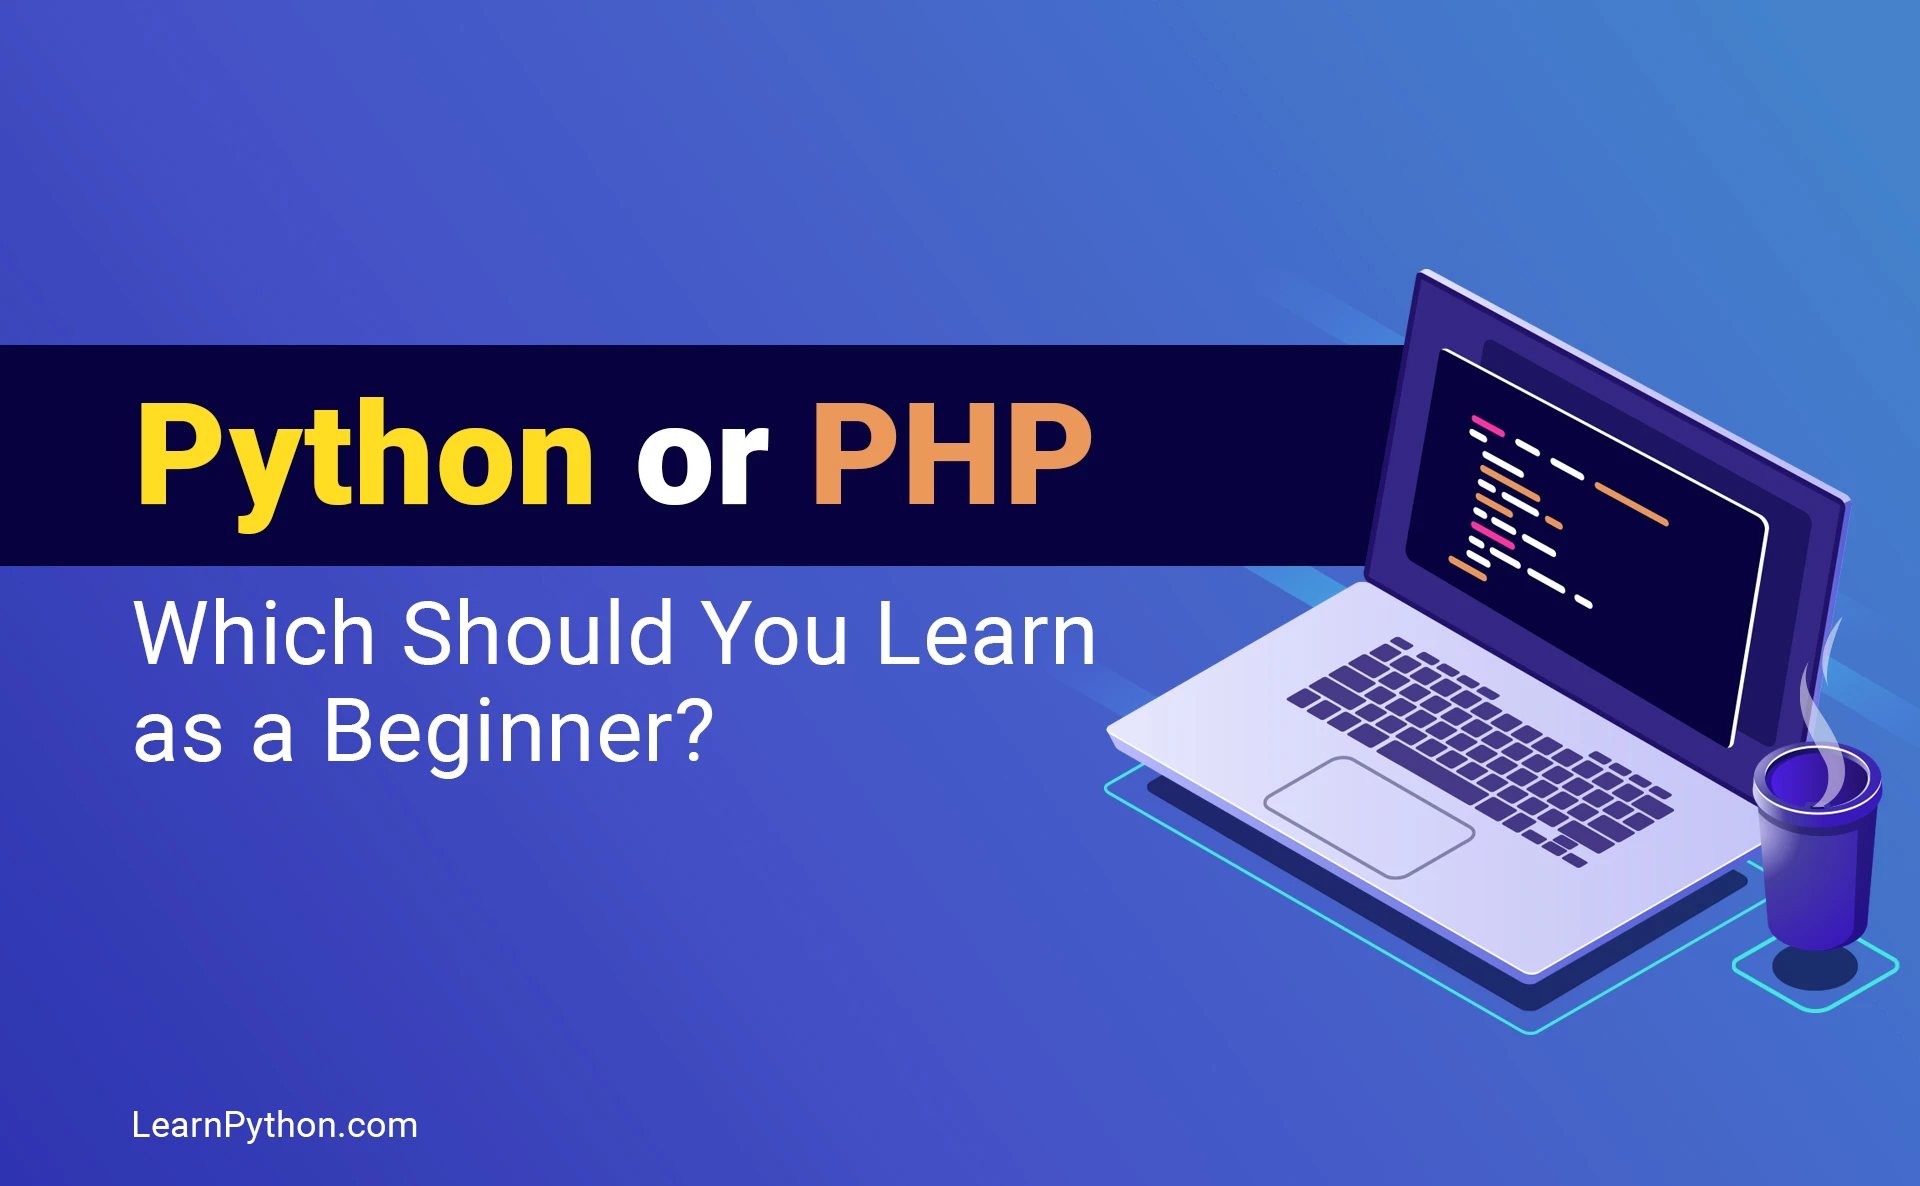 Python or PHP: Which Should You Learn as a Beginner?